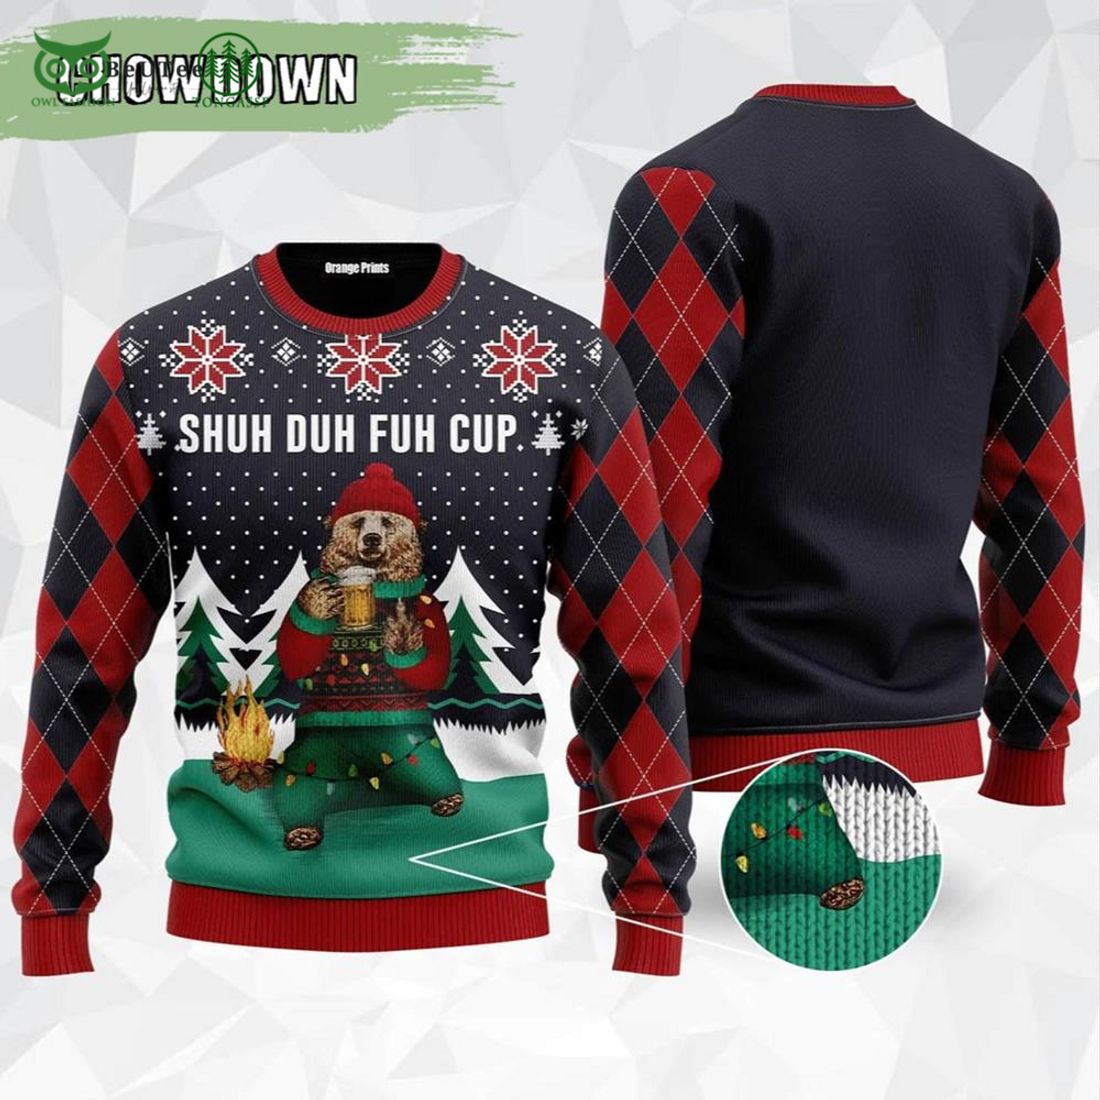 shuh duh fuh cup beer ugly christmas sweater 1 jVo8C